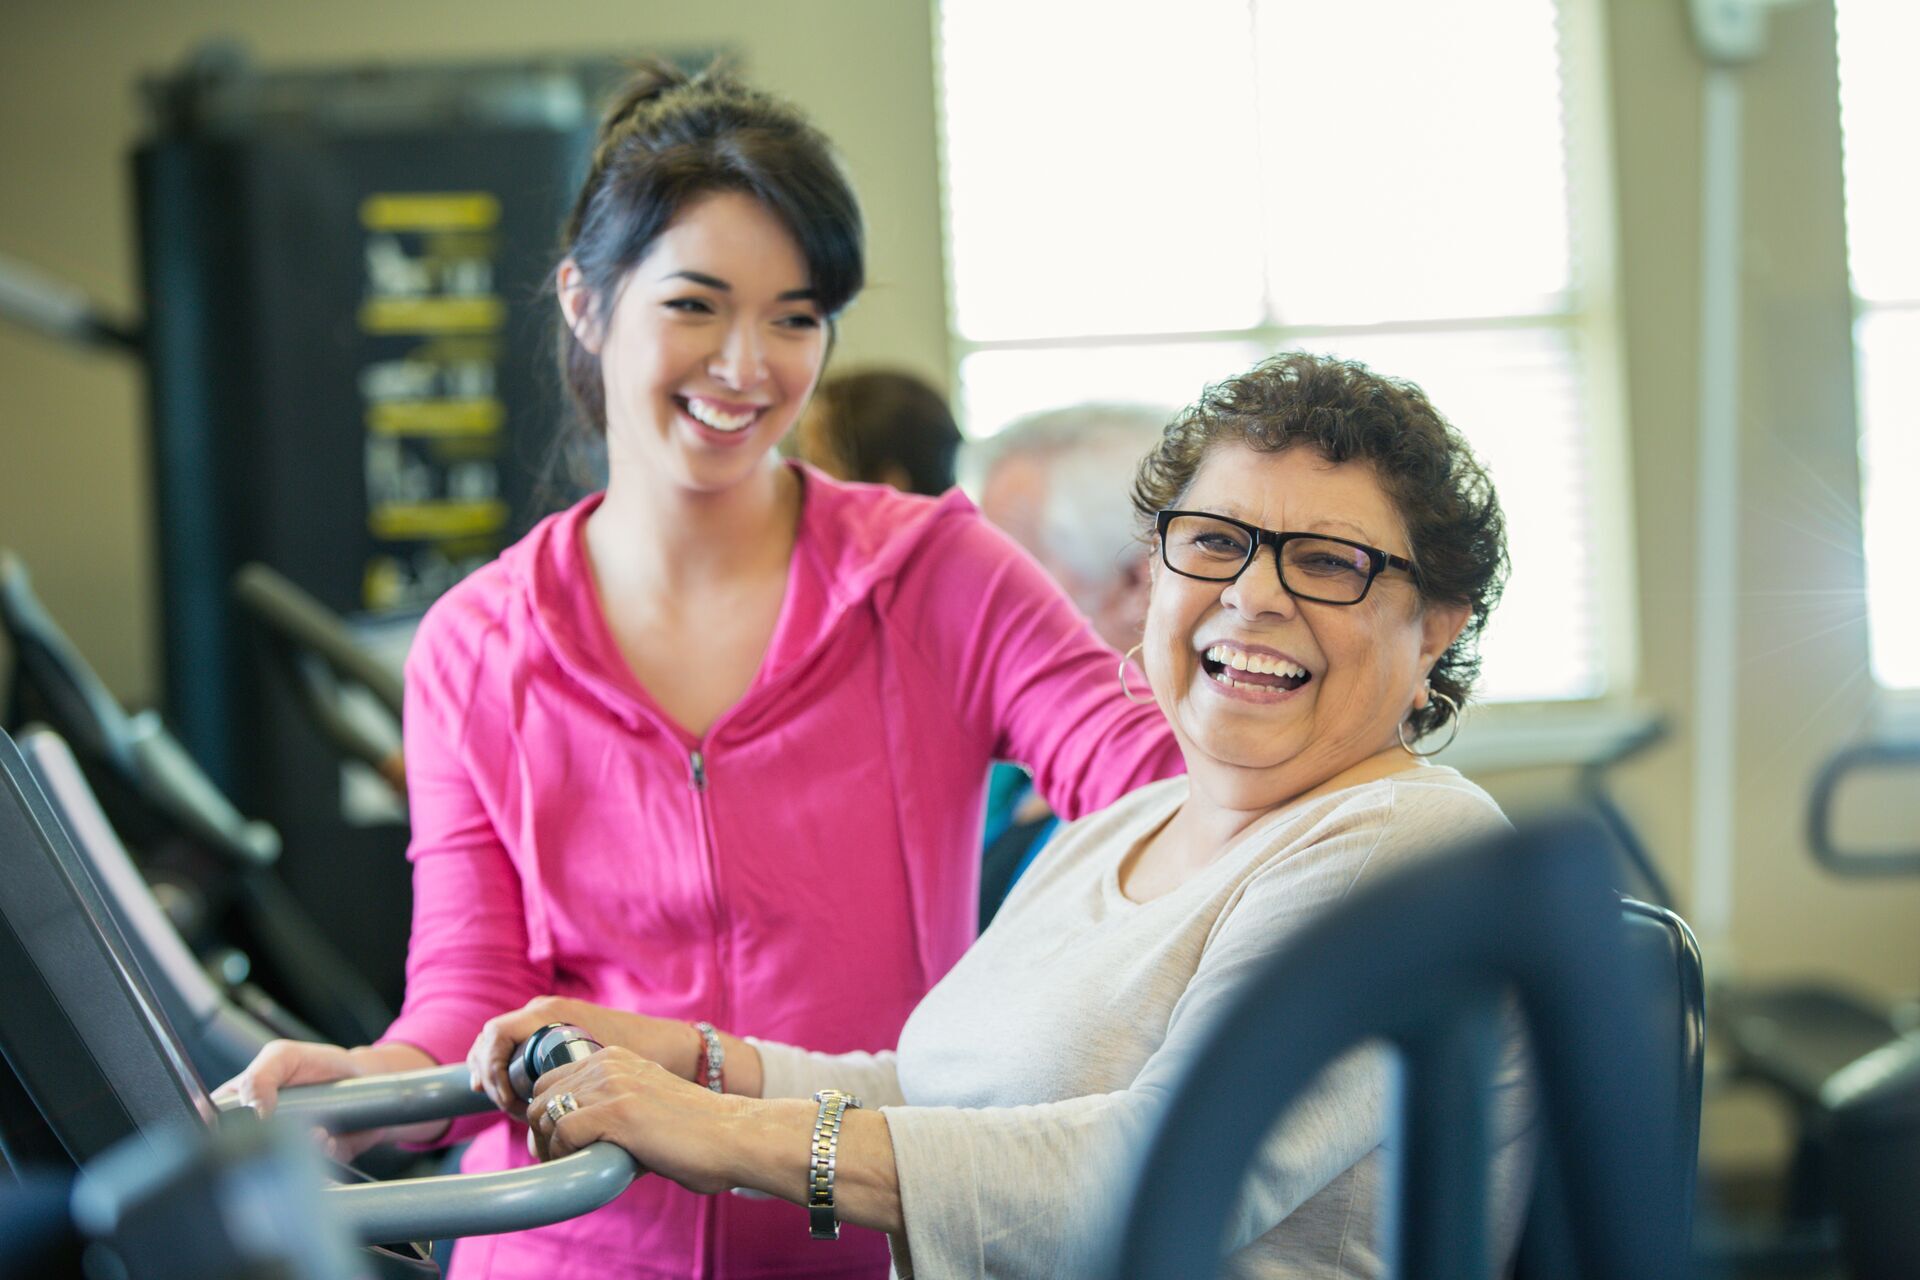 Beautiful Hispanic senior woman confidentlly uses machine at gym or senior center. Young female personal trainer helps the senior woman. They are both smiling. People are working out it the background.